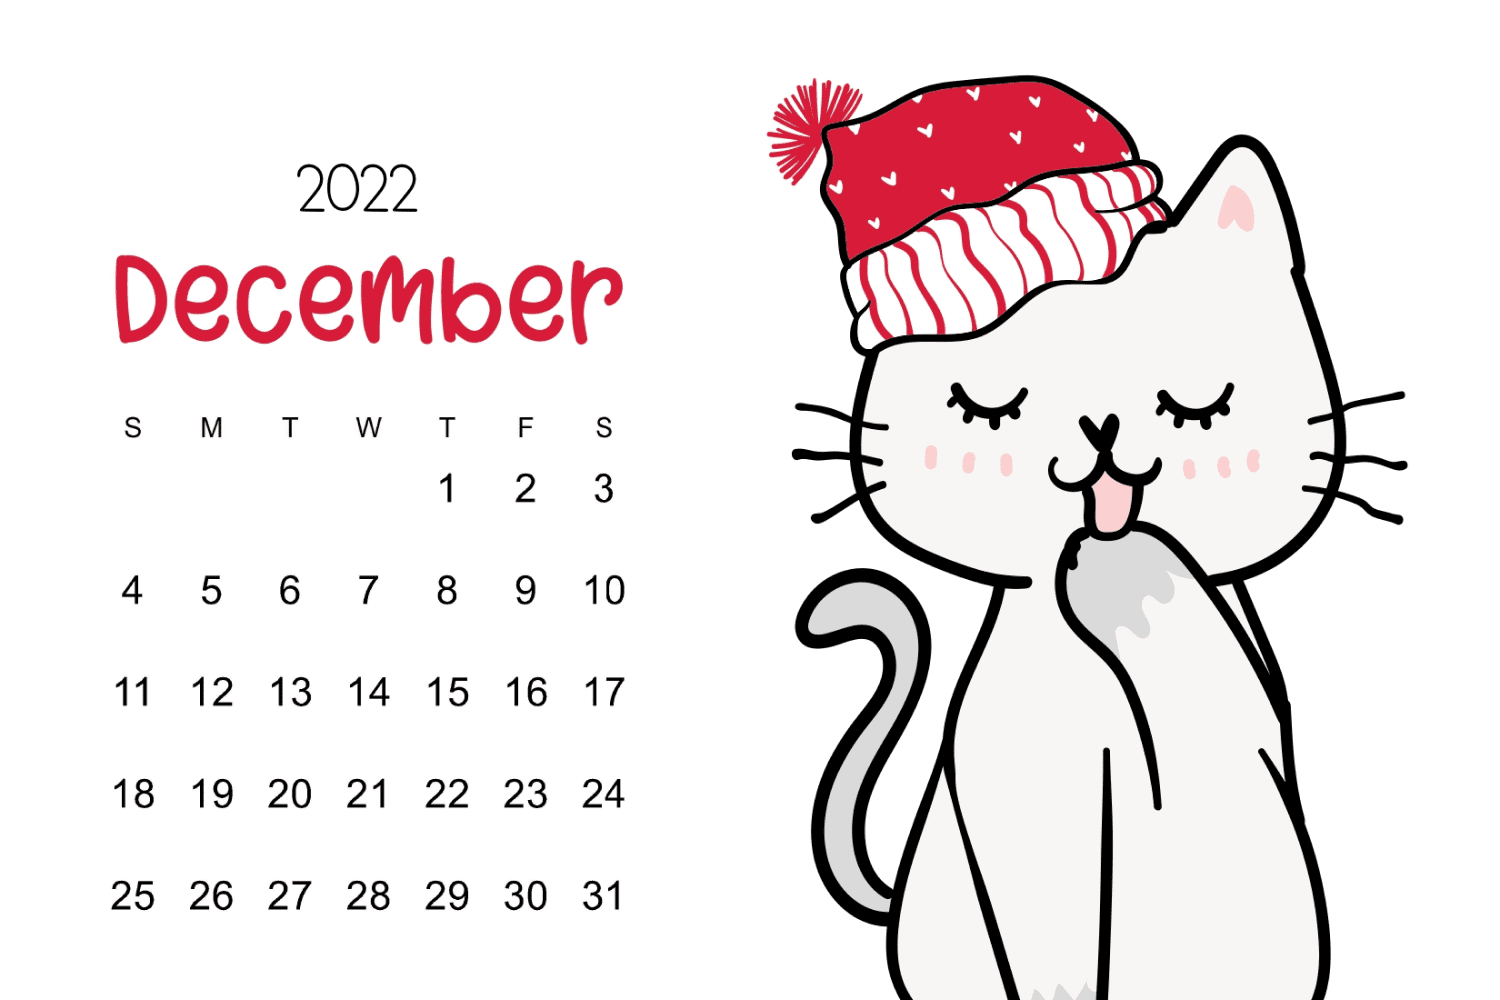 Funny and cute December calendar with kitty.